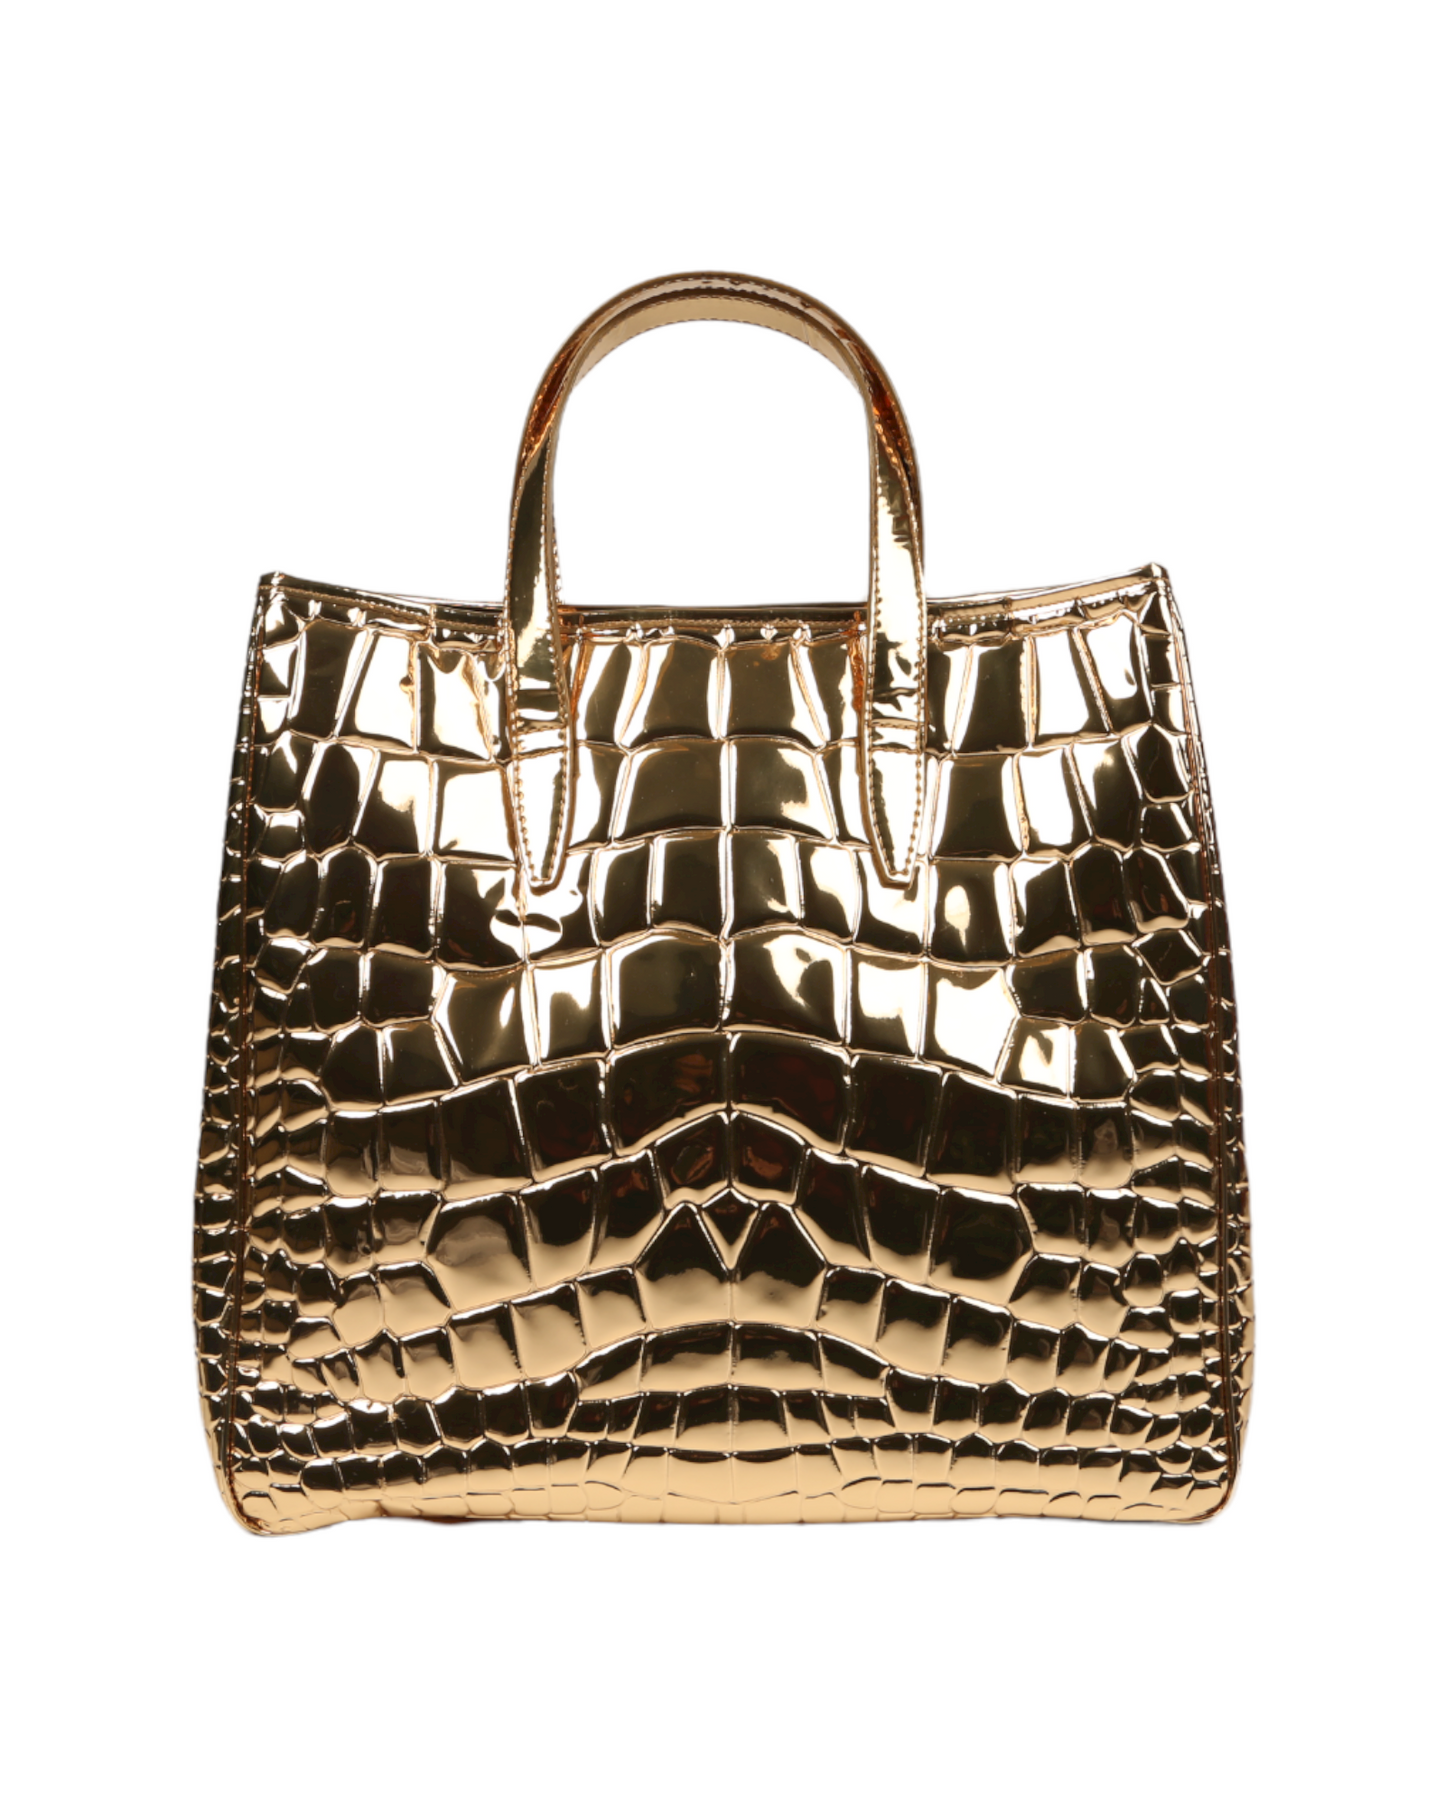 Yves Saint Laurent Gold Leather Tote Bag